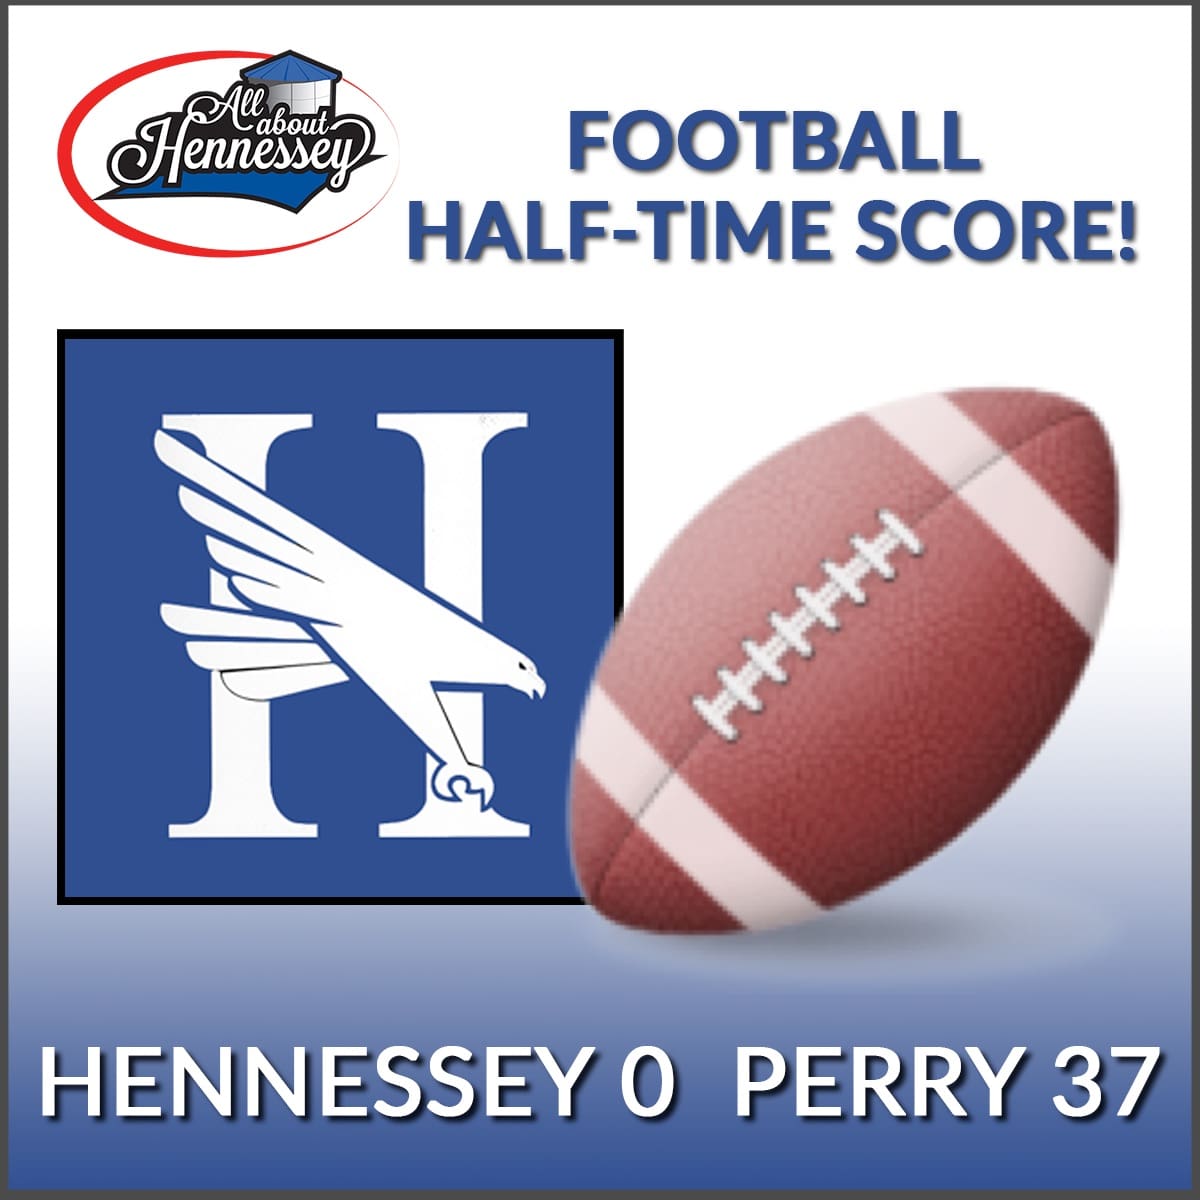 HALF TIME SCORE HENNESSEY 0 PERRY 37